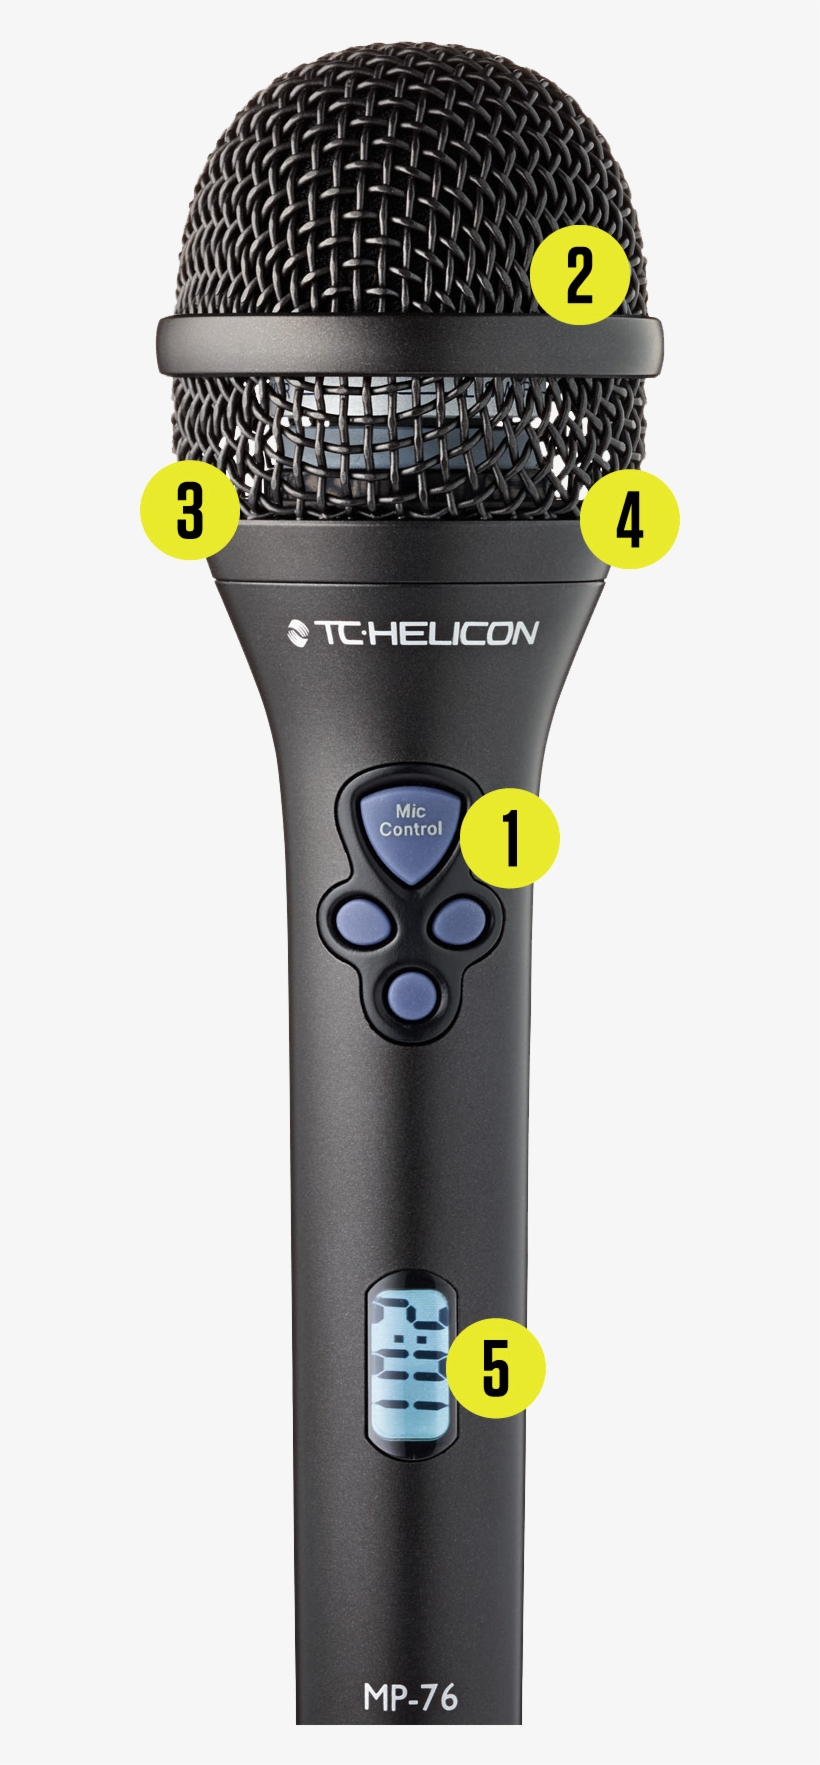 Features - Tc Helicon Mp-76 Microphone, transparent png #2129487